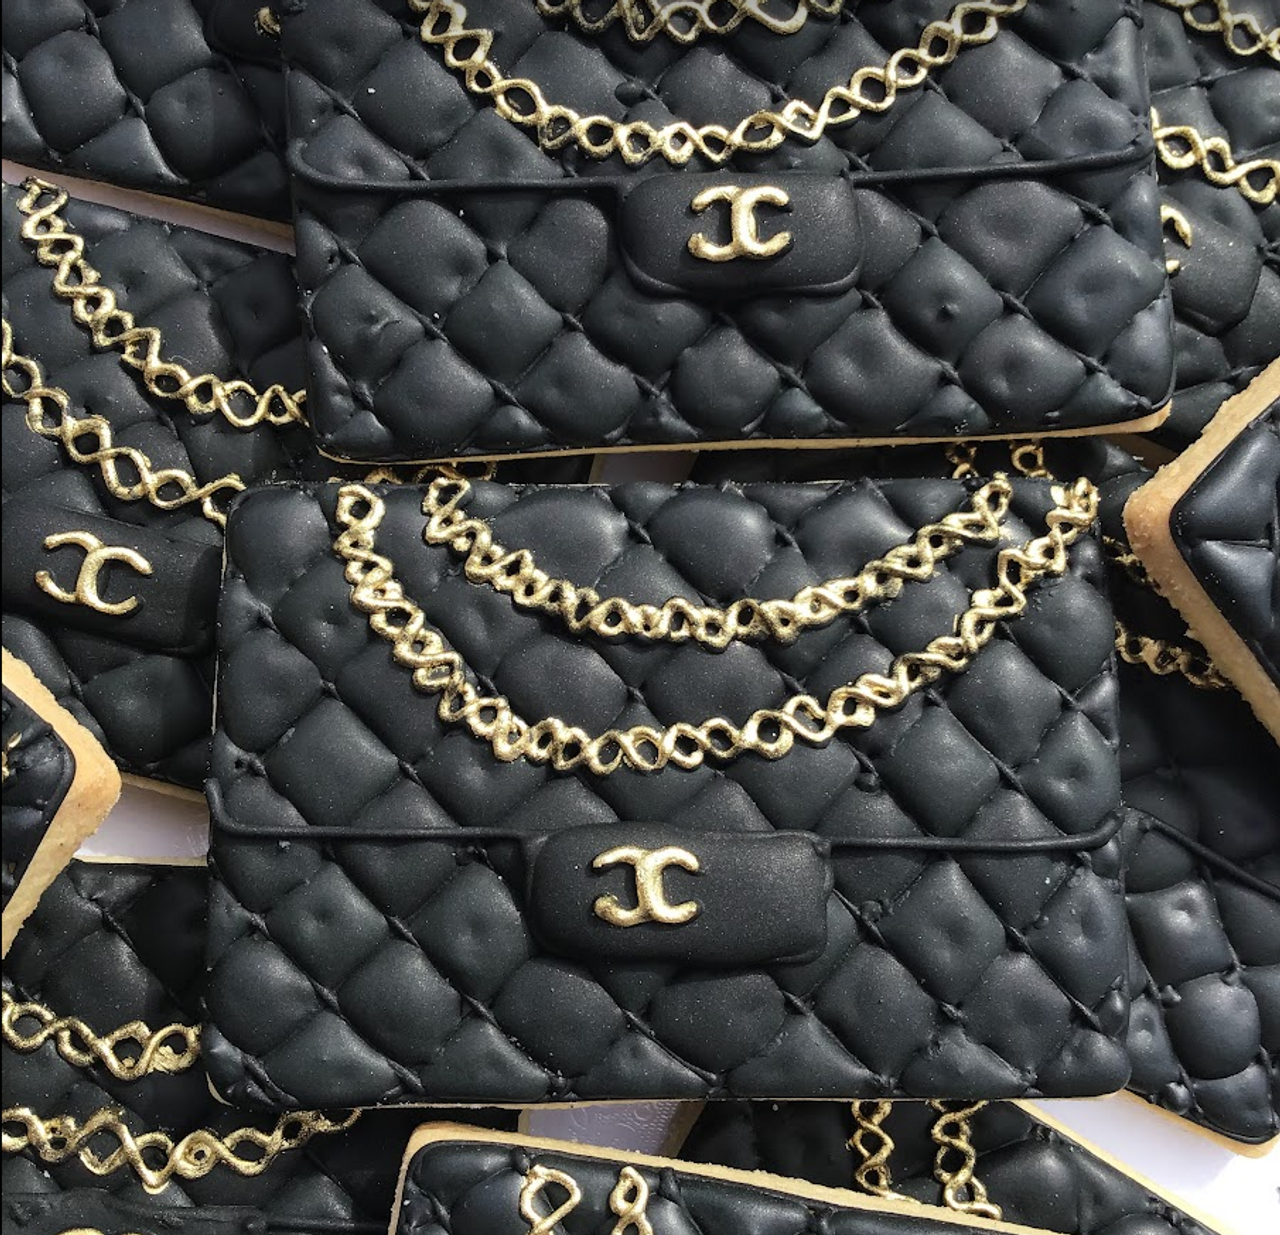 Chanel Bag Icing Cookies - 8 per 9x13 Gift Platter